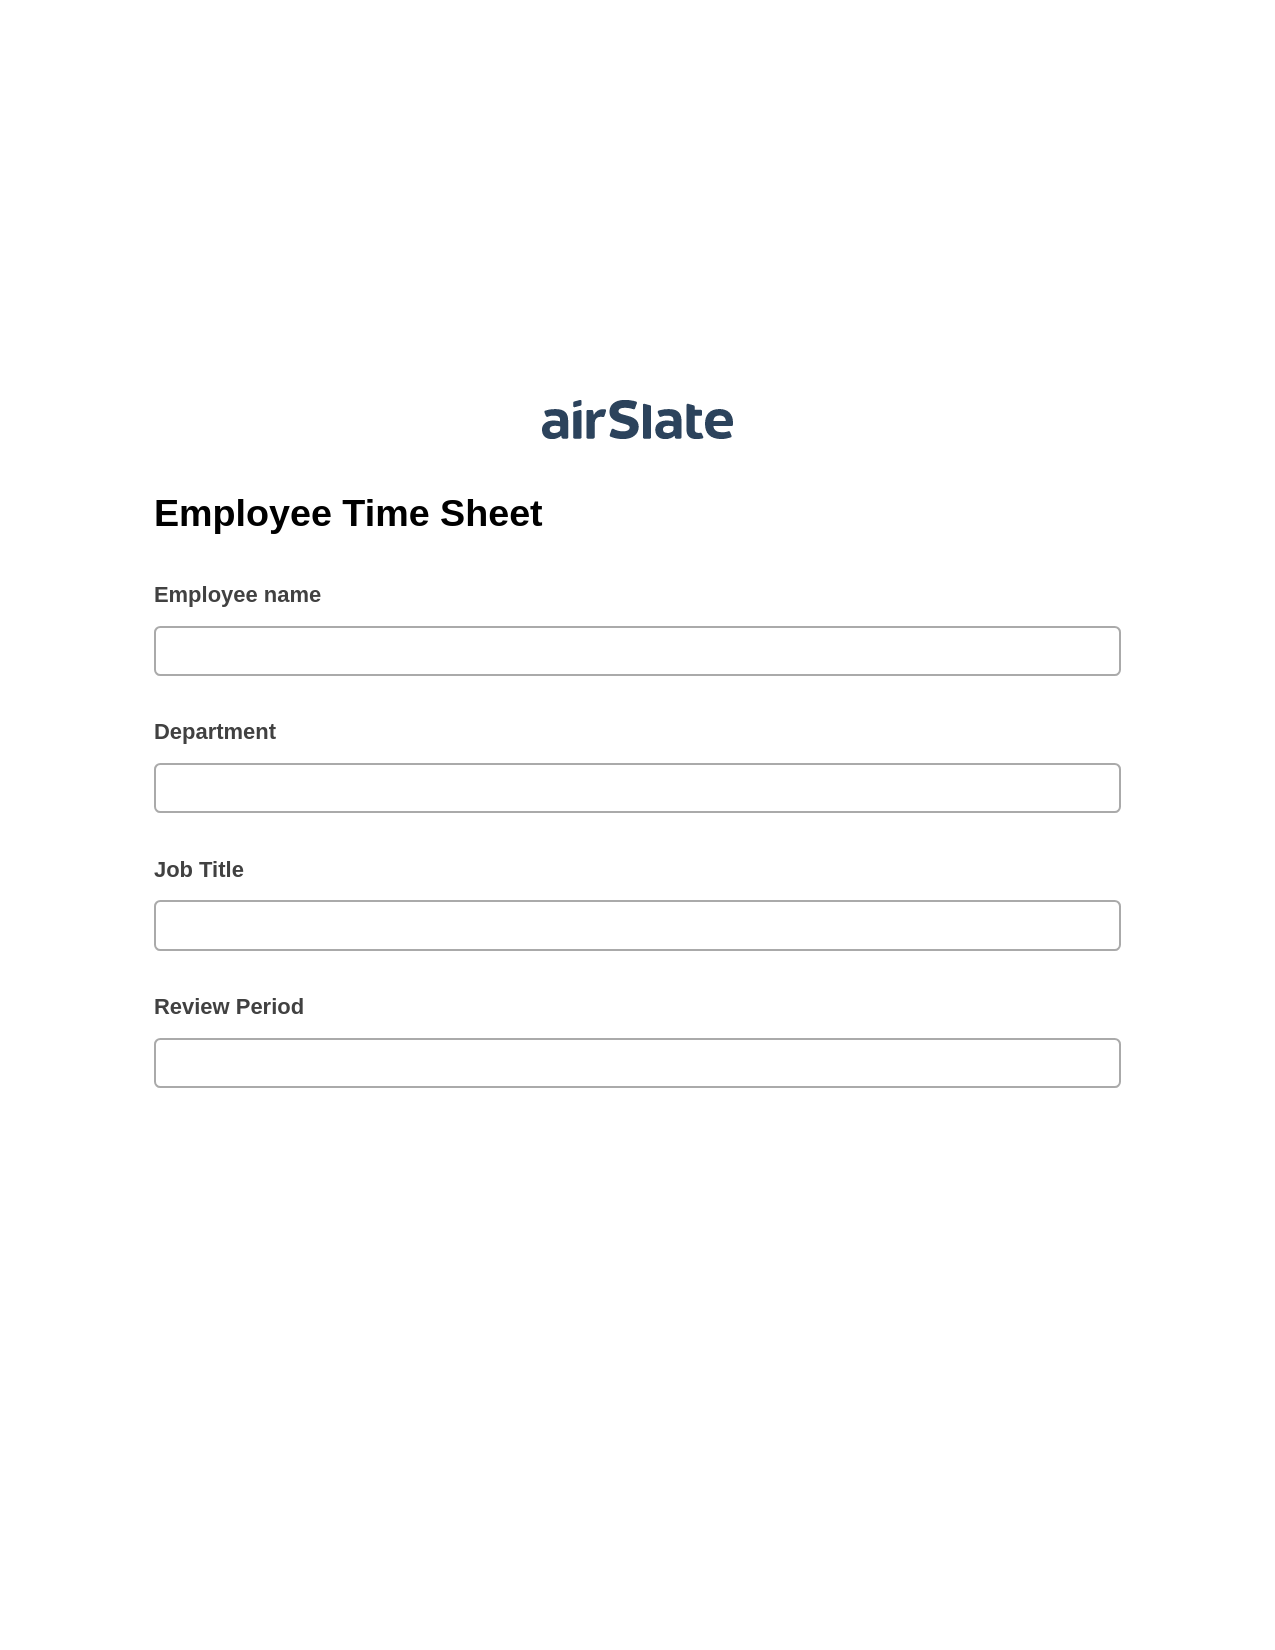 Employee Time Sheet Pre-fill Dropdowns from Google Sheet Bot, Lock the Slate Bot, Export to Excel 365 Bot